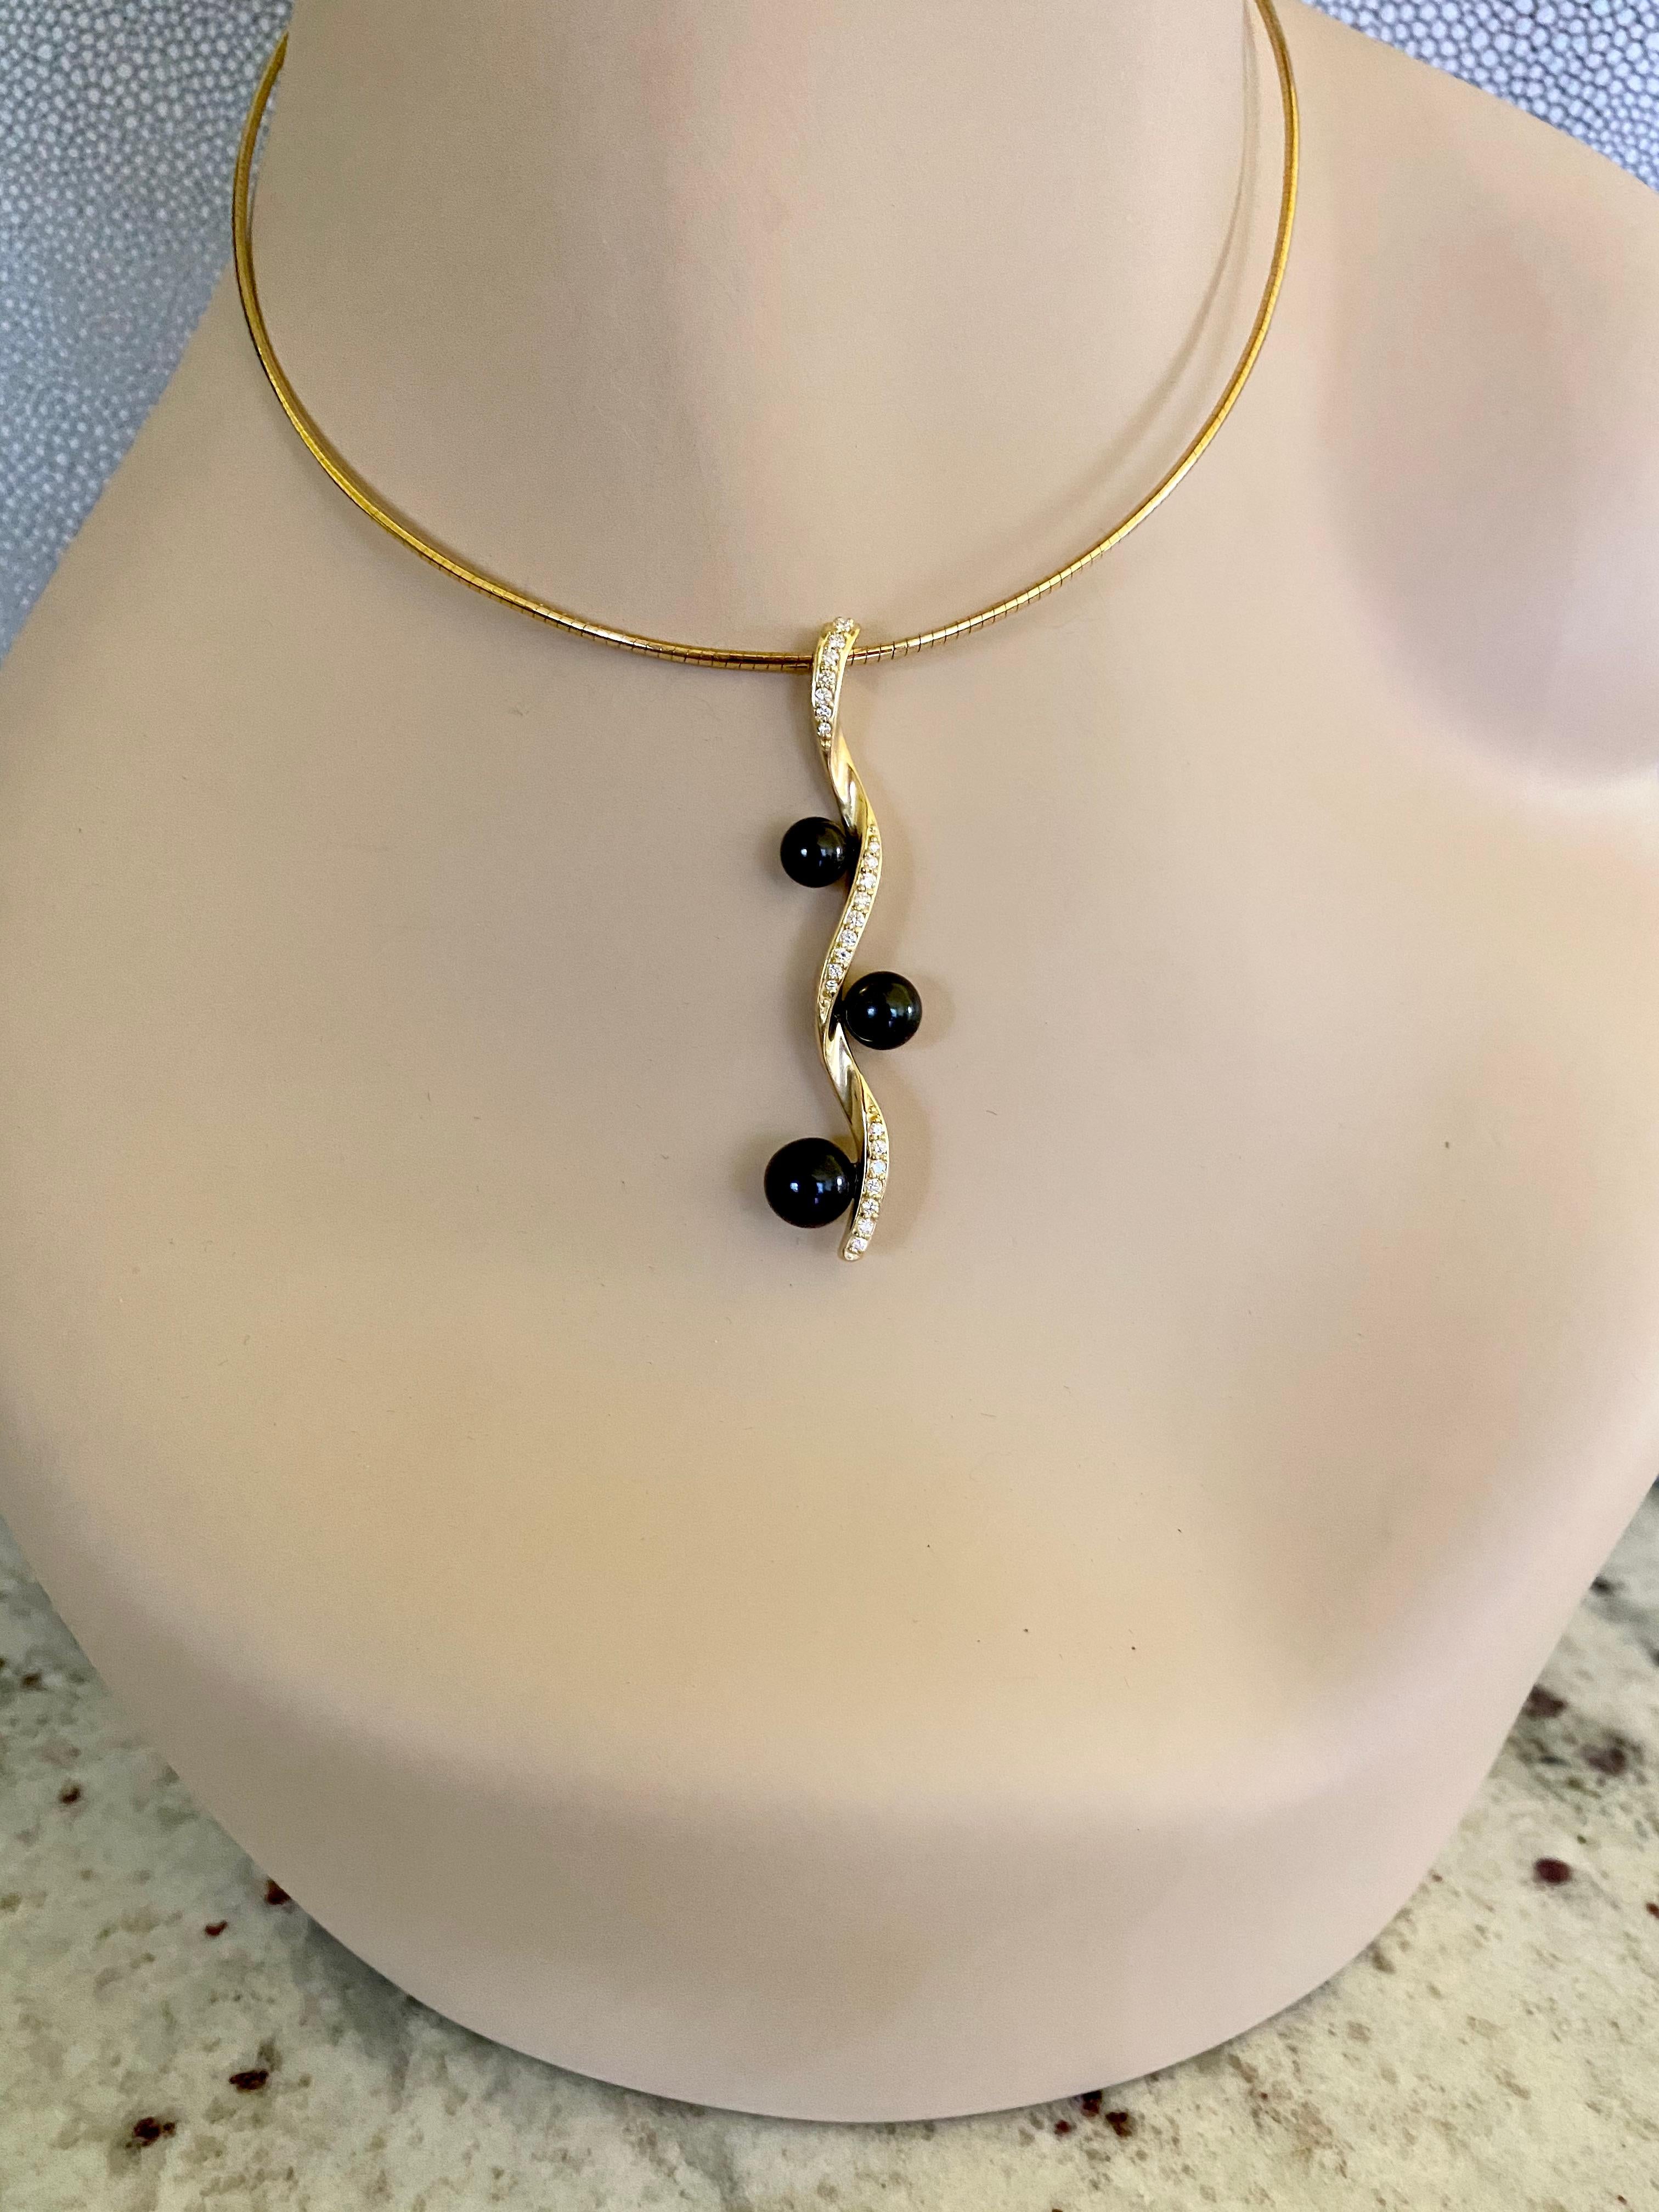 Black Akoya pearls (origin: Japan) in graduated sizes are featured in this unique Helix pendant.  The pearls are gem quality and possess a rich luster.  White diamonds are pave set within the curves of the twisted 18k yellow gold.  The pendant hangs